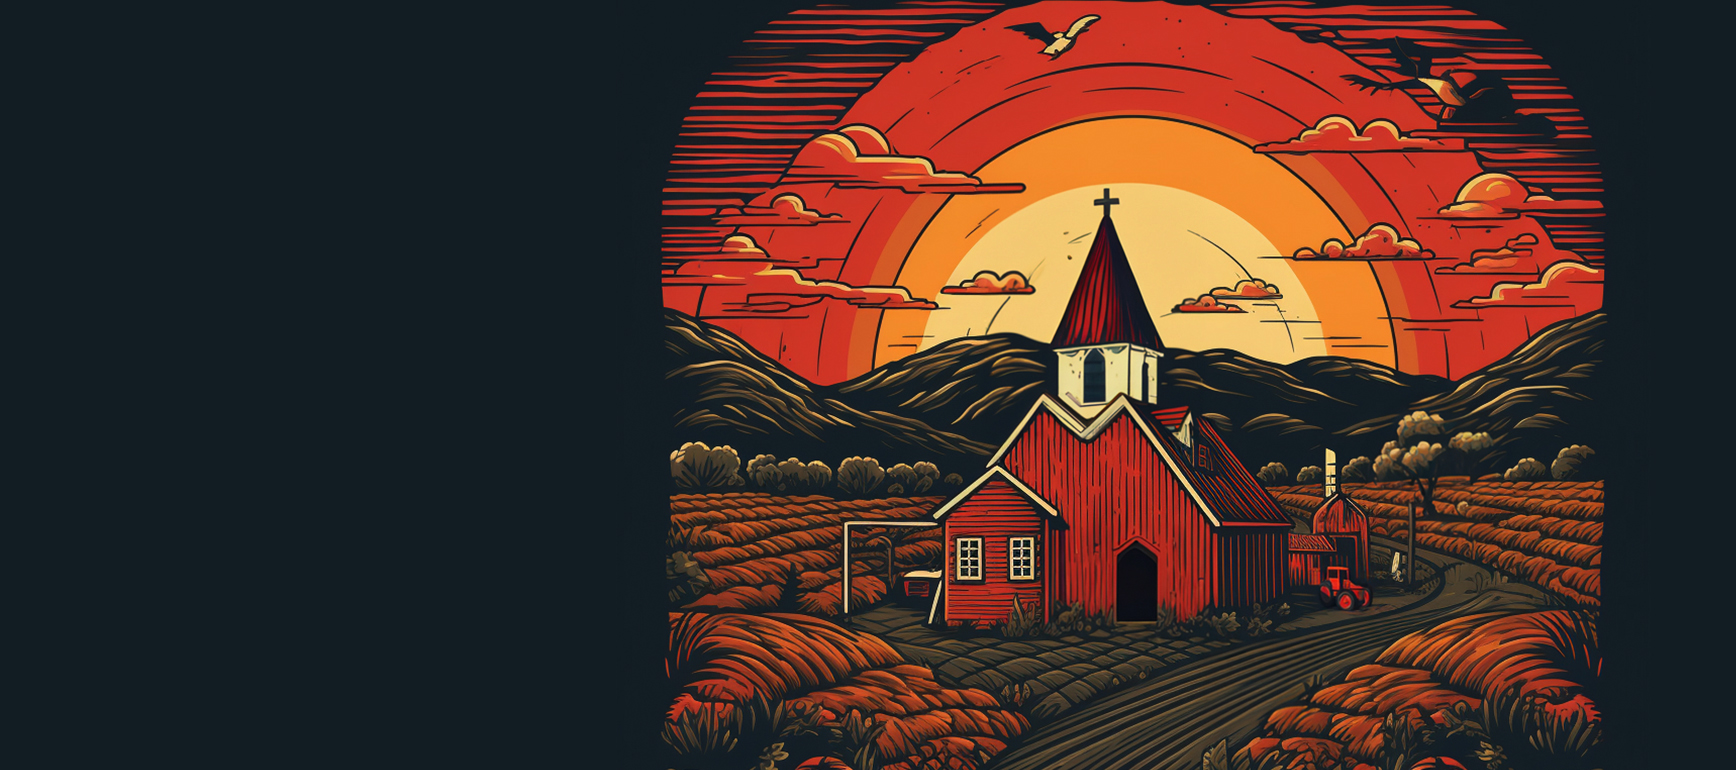 Introducing Country Chapel: Lessons in Rural Ministry, a New Podcast from CGN Media